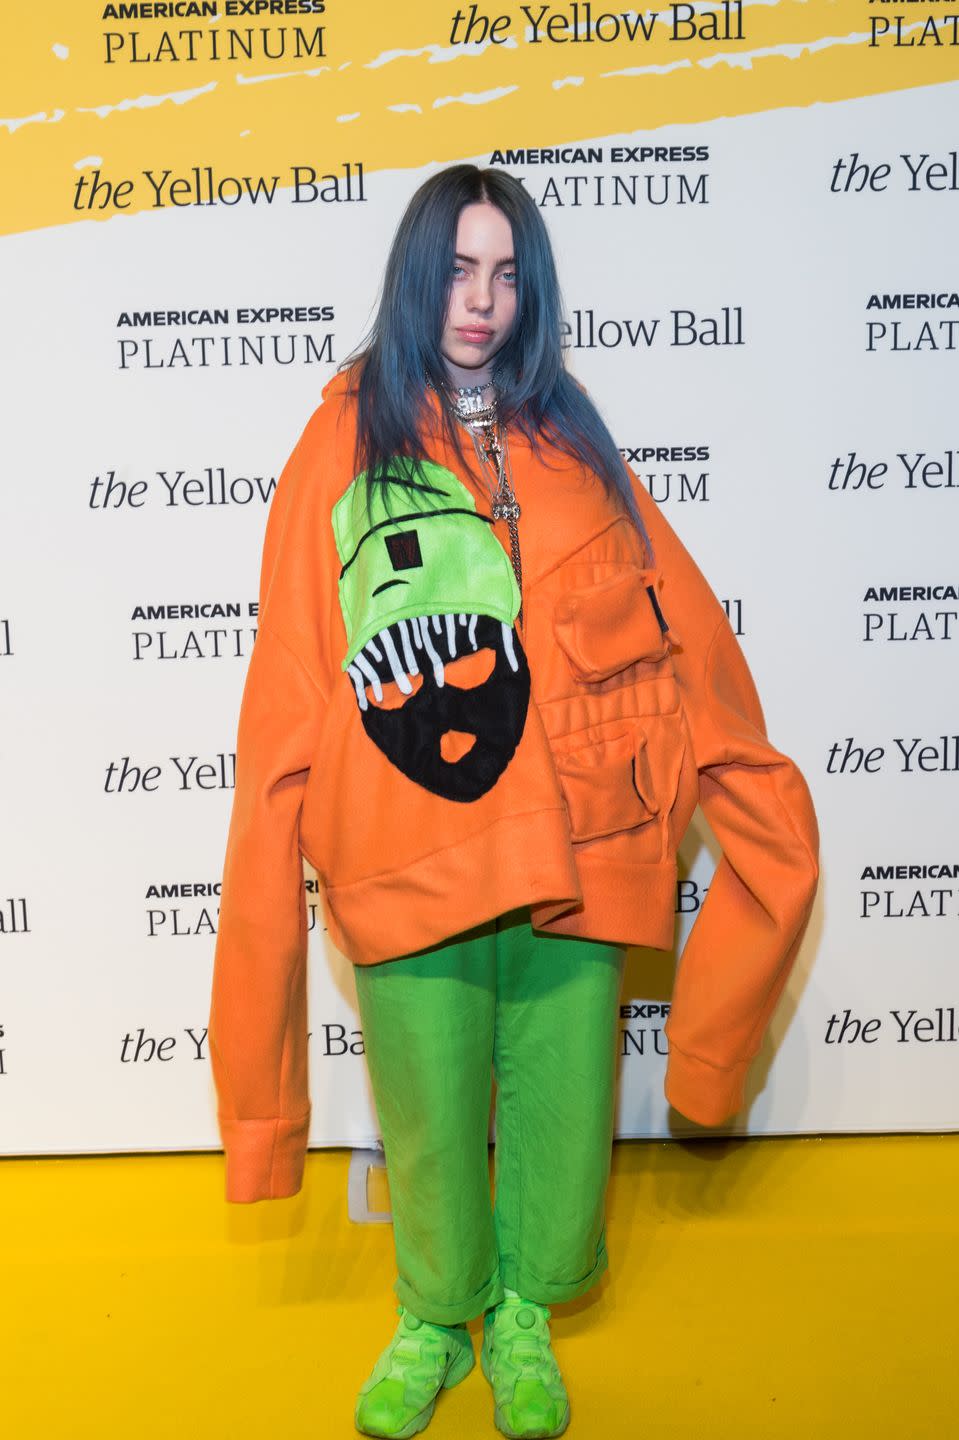 Billie at the Yellow Ball